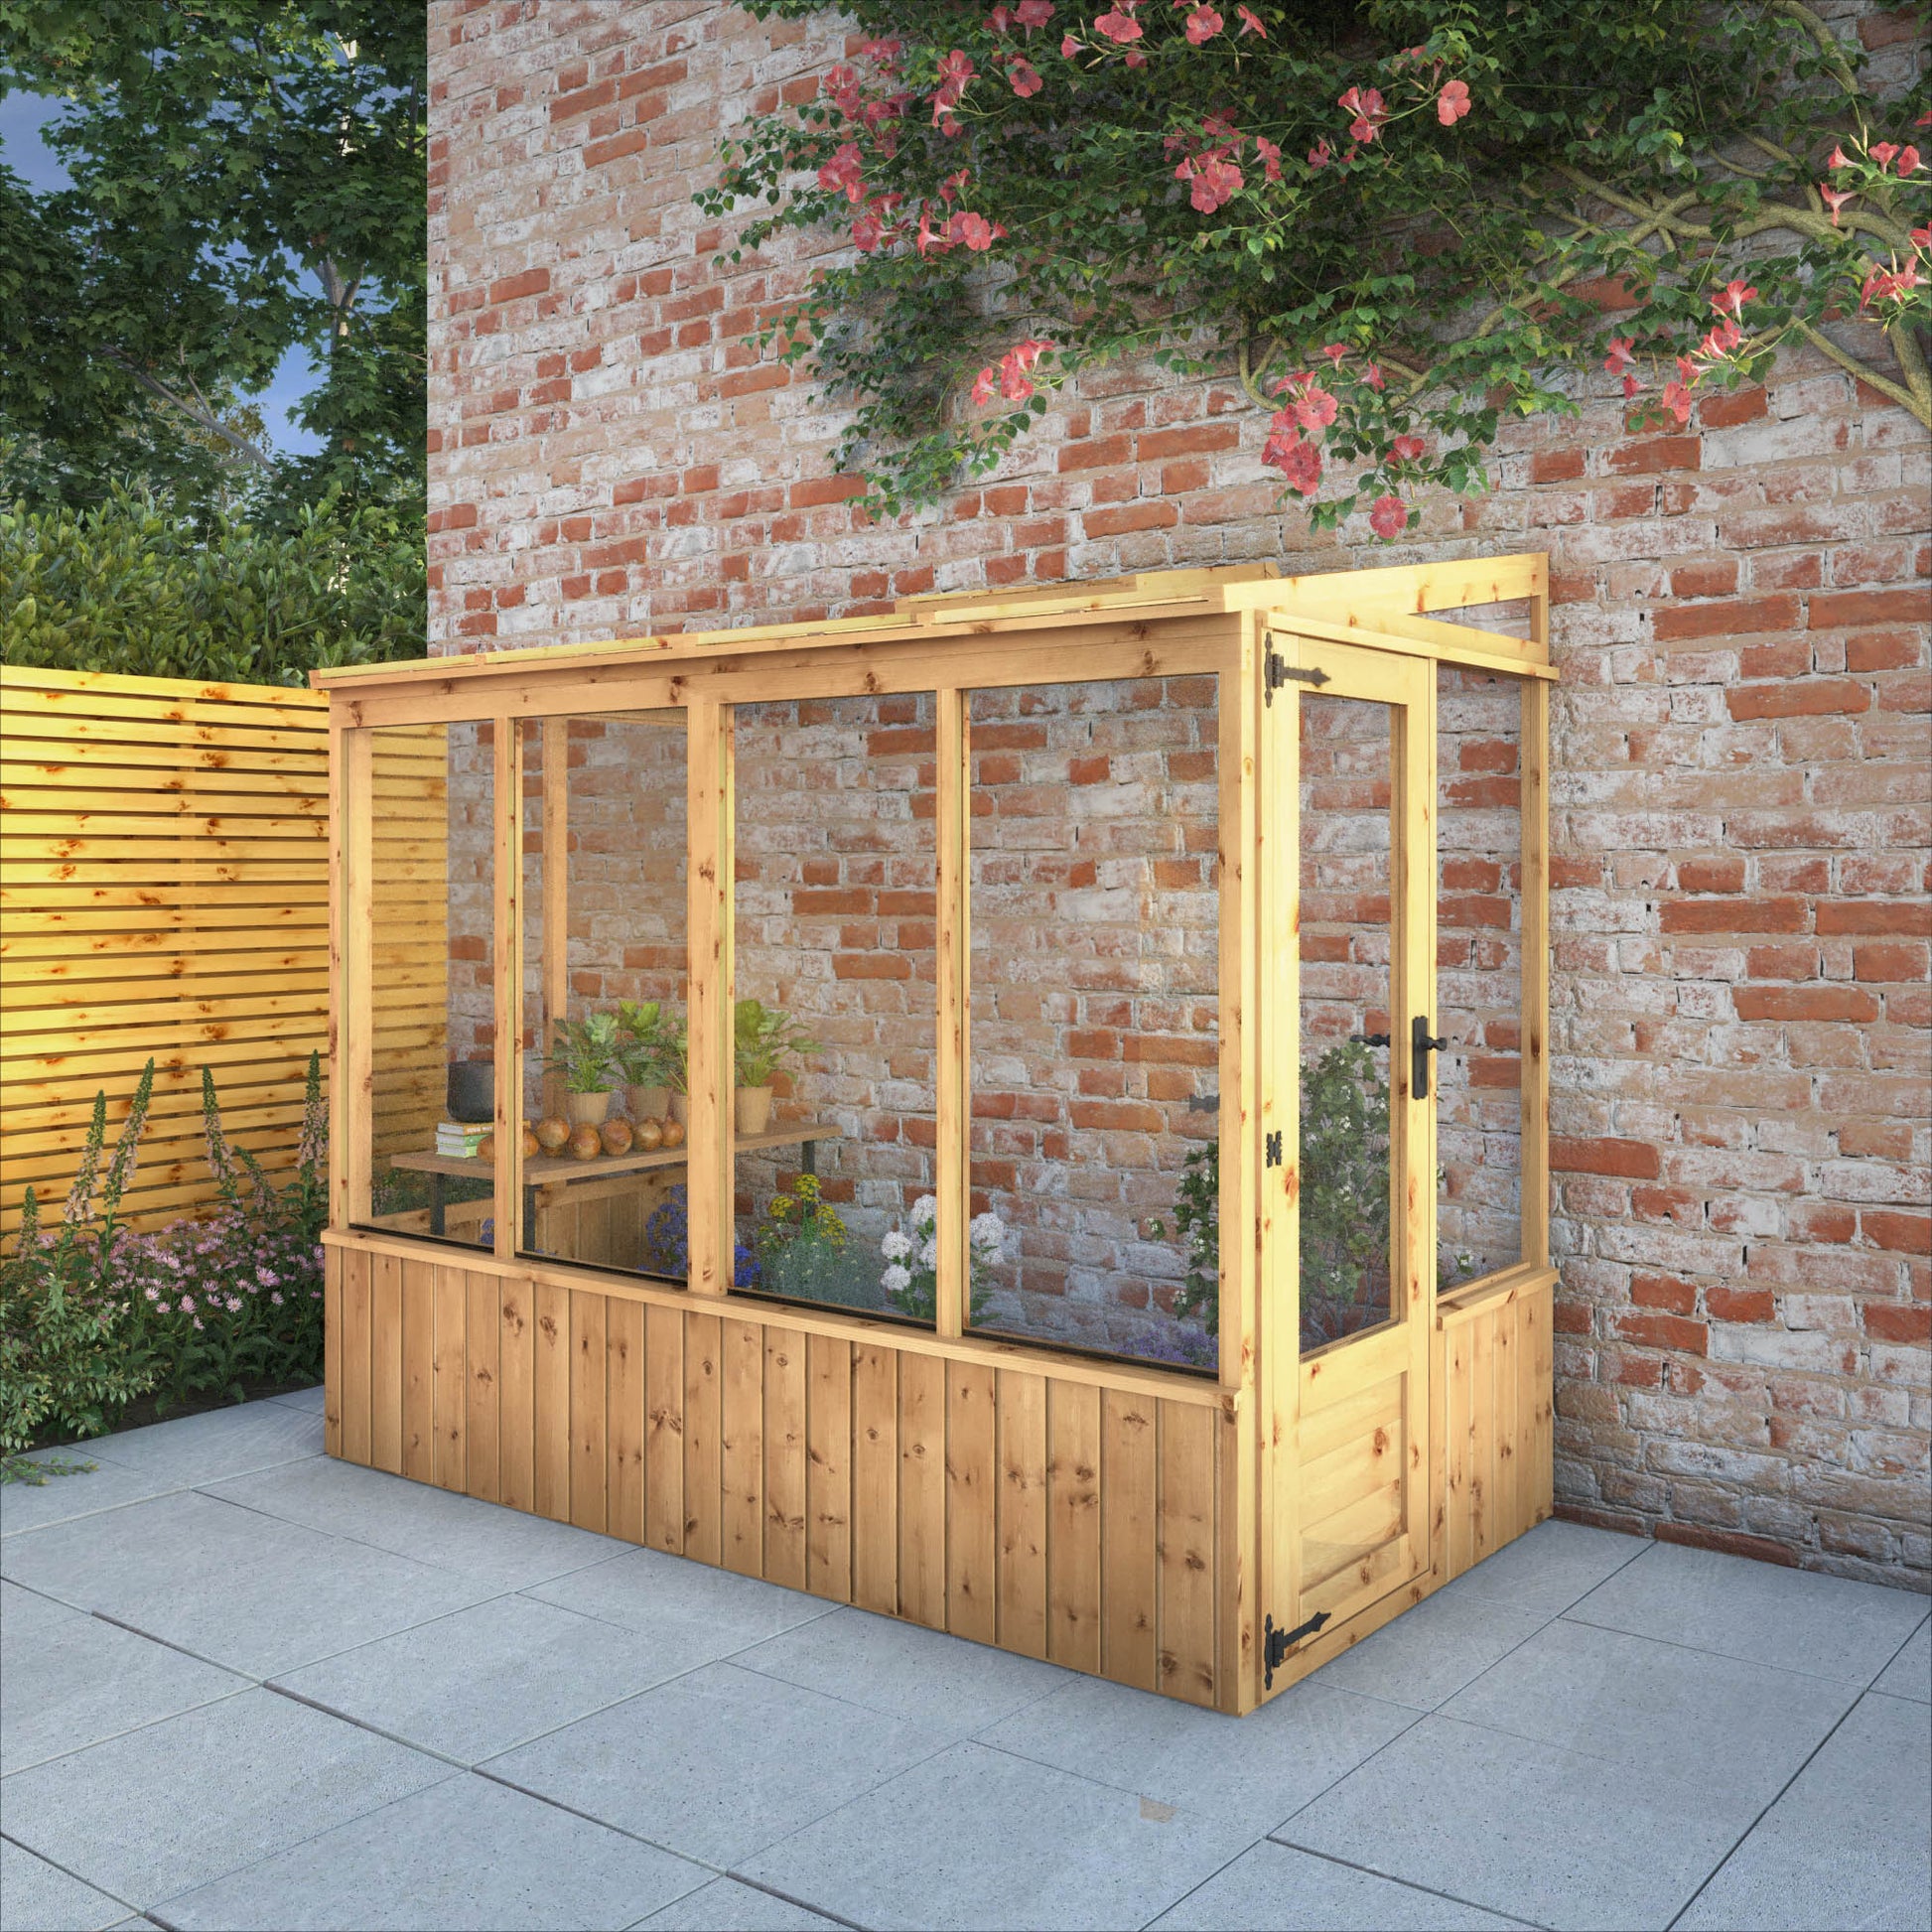 A lean-to greenhouse against a brick wall made from timber